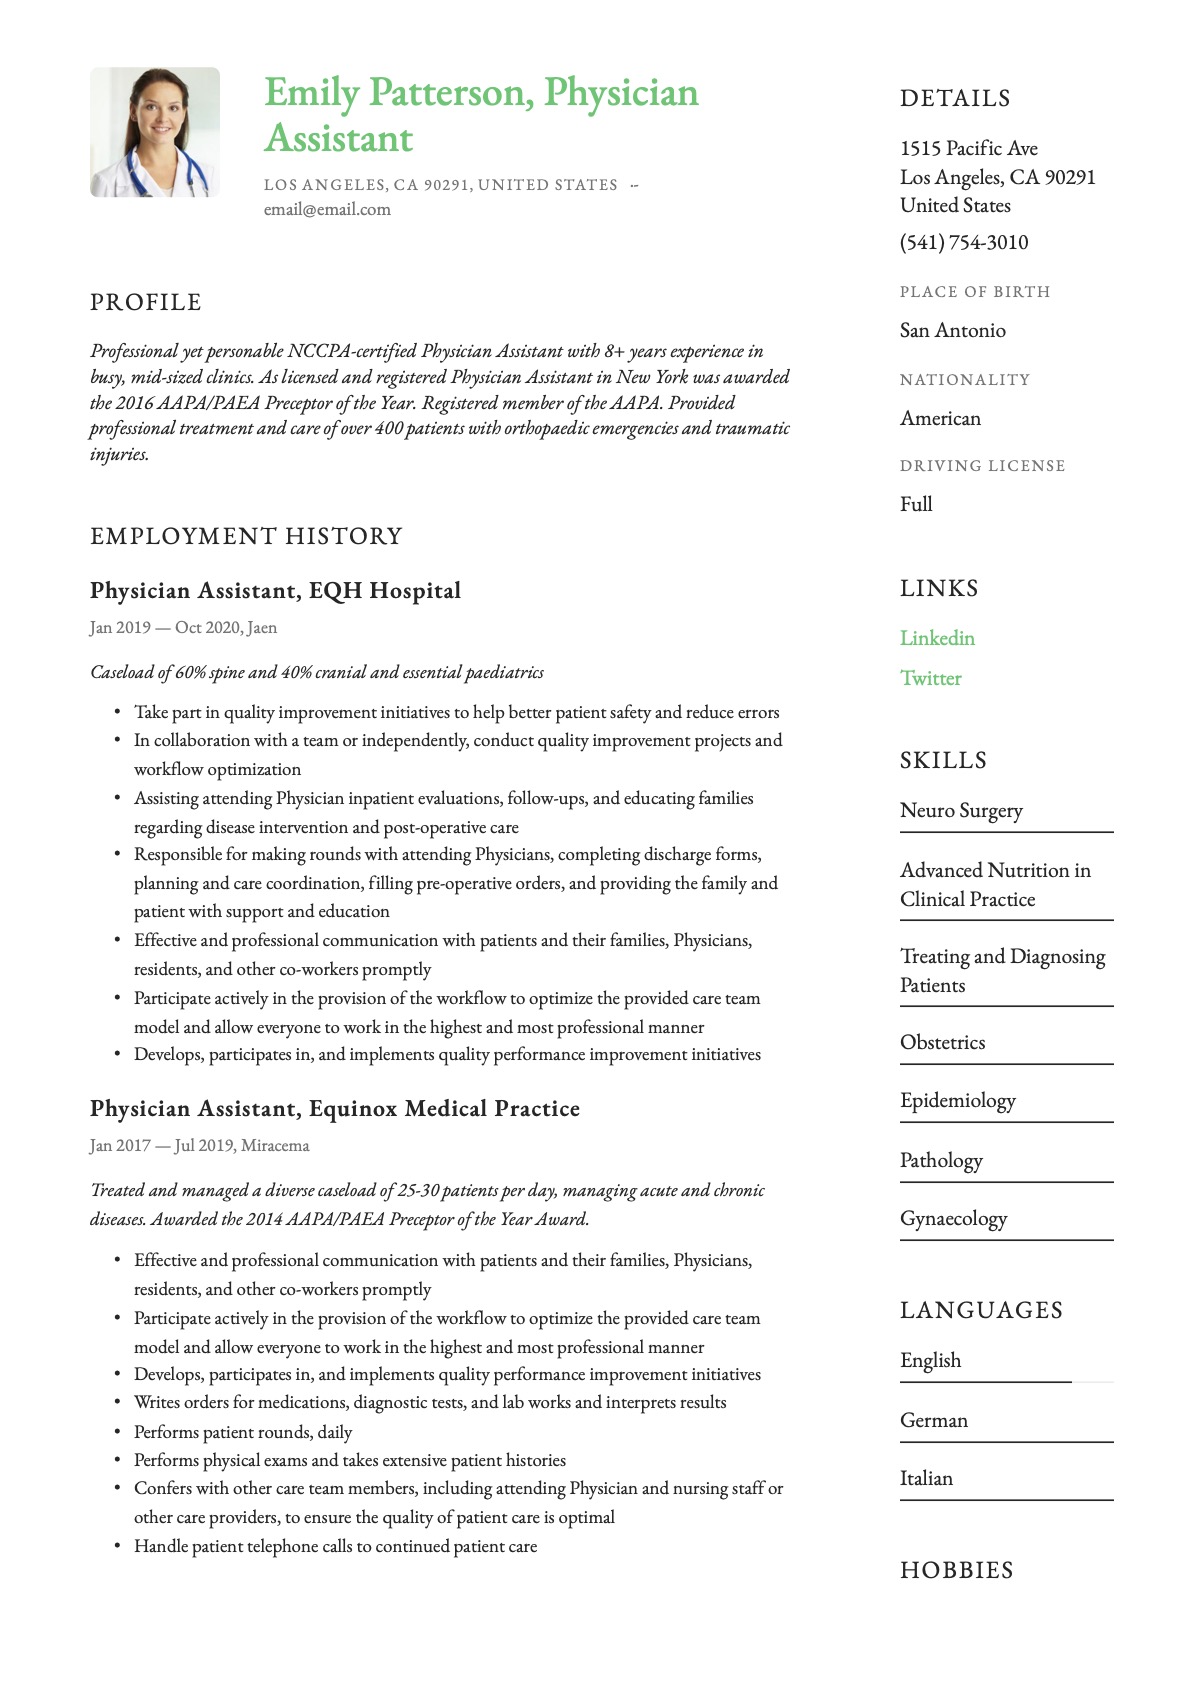 Example Resume Physician Assistant-13